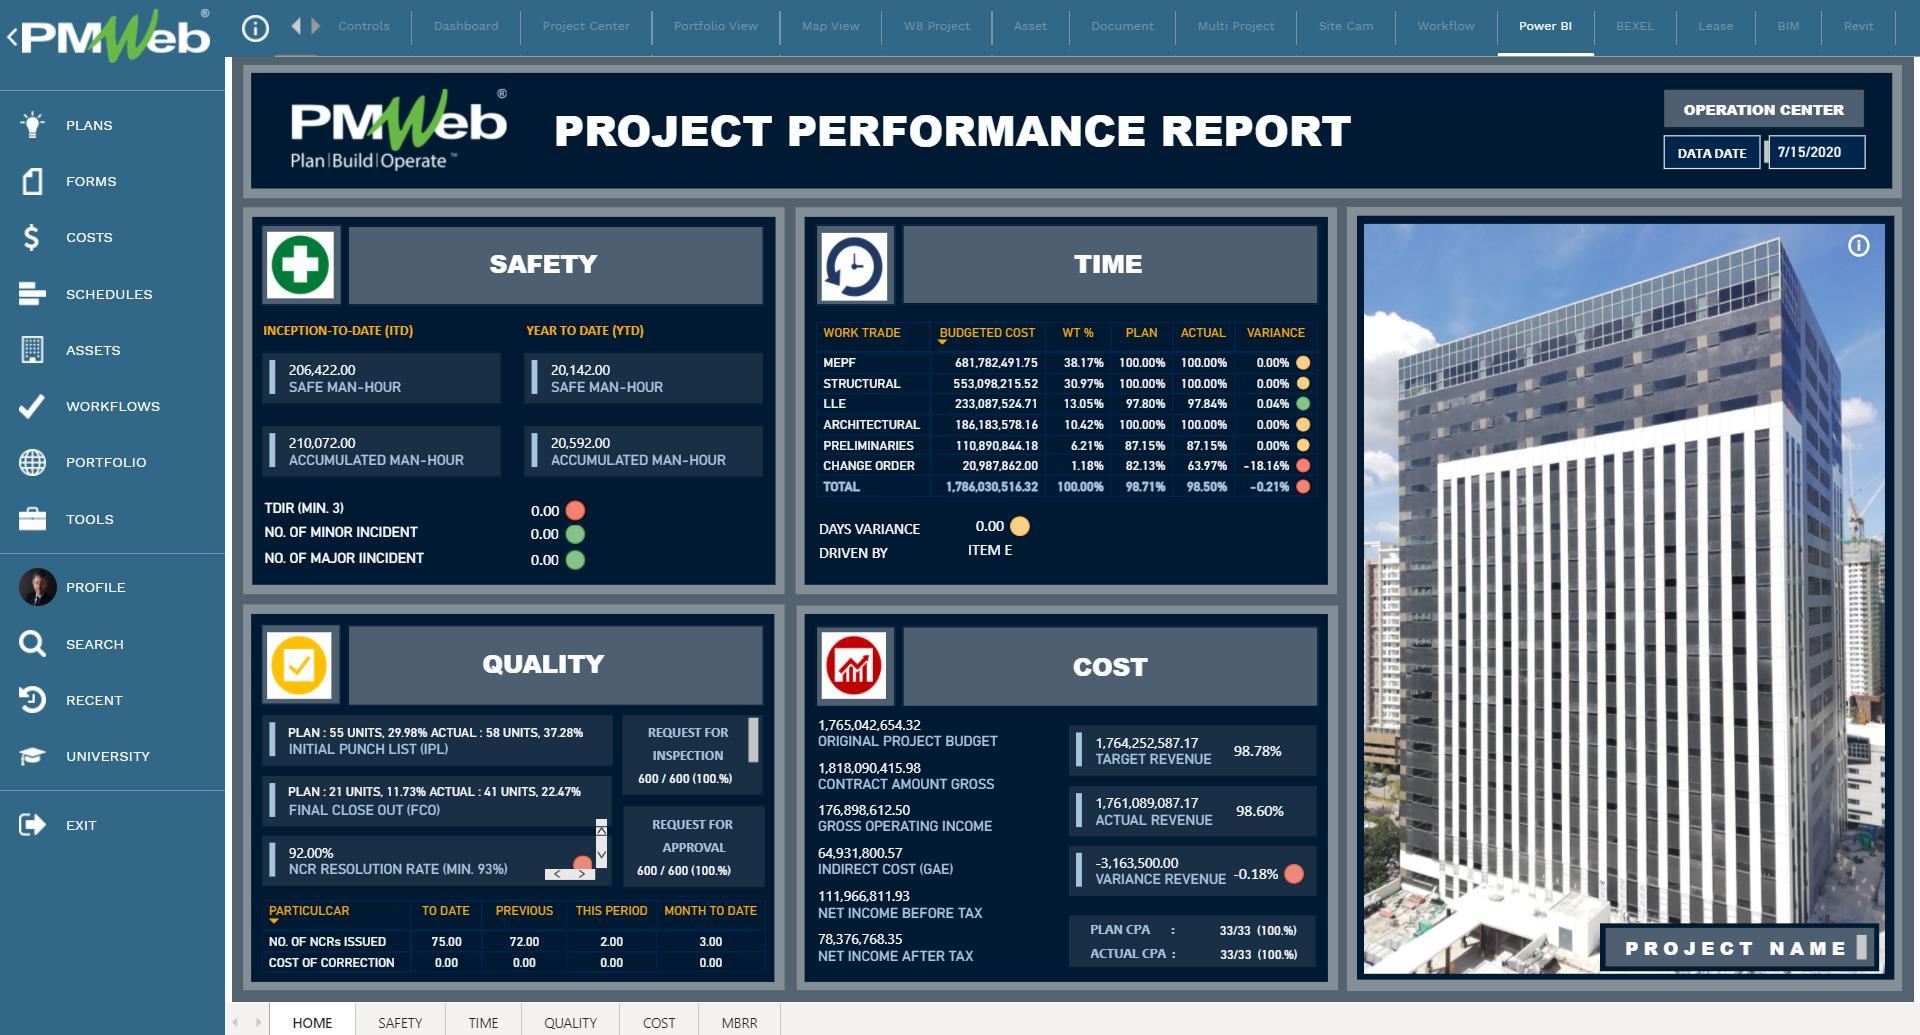 What Are the Key 4 Signs to Tell You that Your Reported Capital Construction Projects’ Performance is Not Trustworthy?